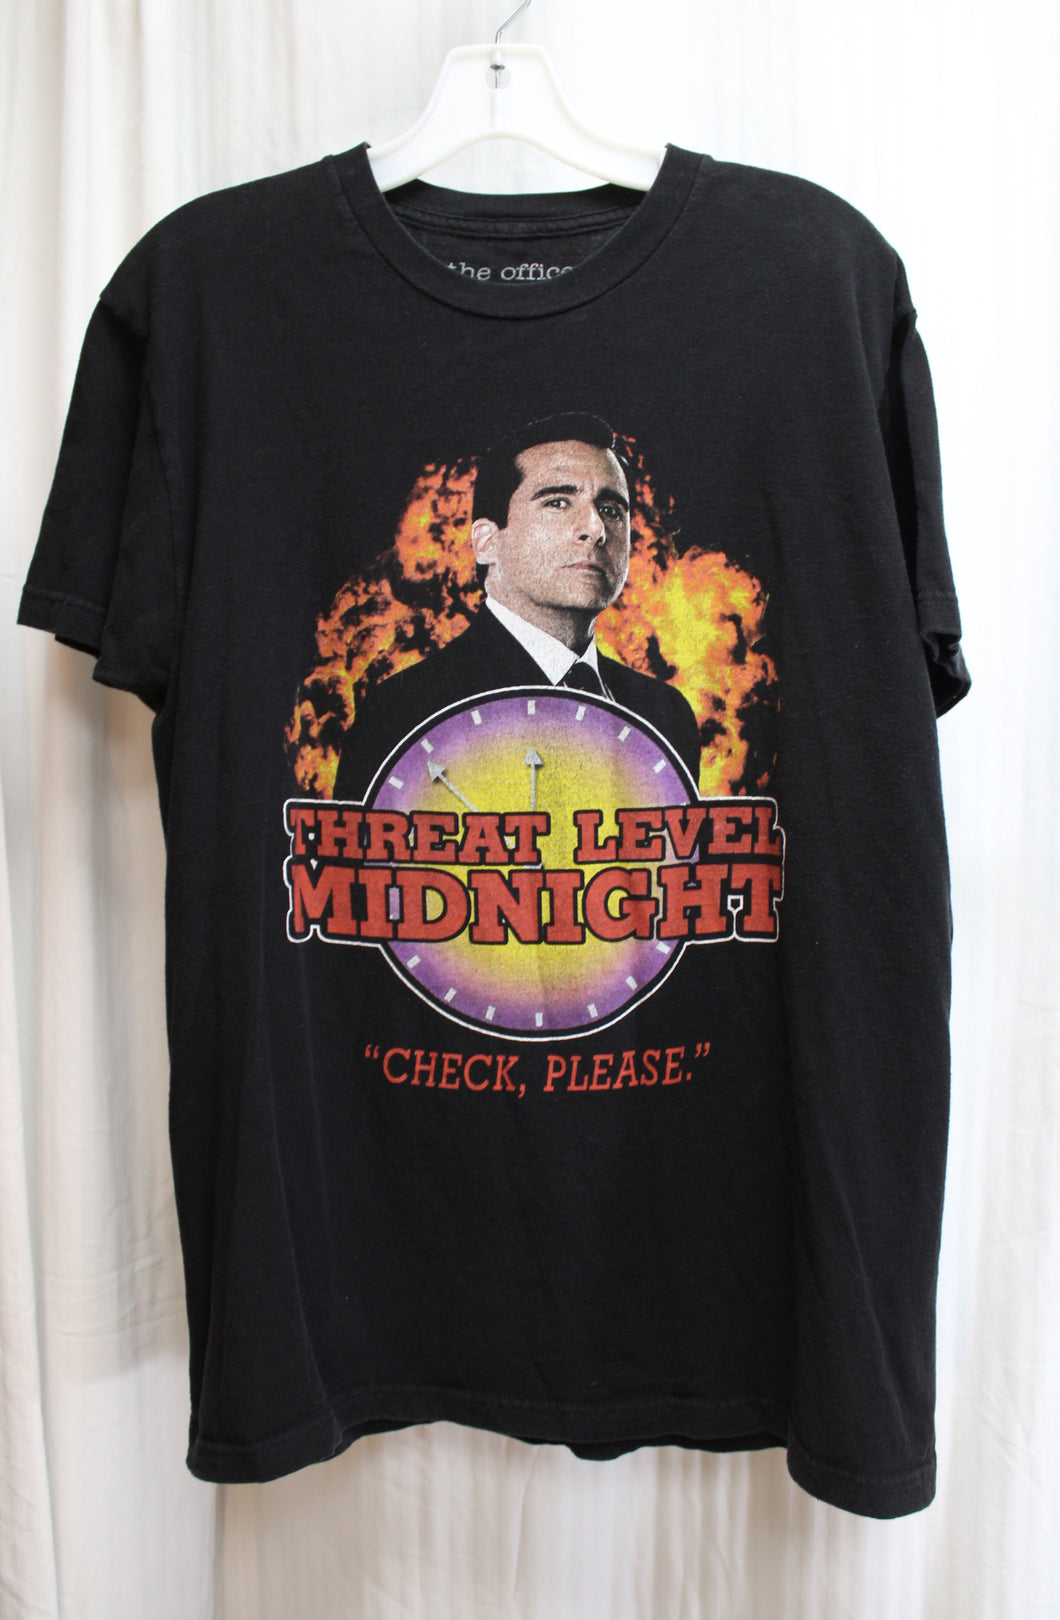 The Office - Threat Level Midnight Check please- Black t-Shirt - Size L